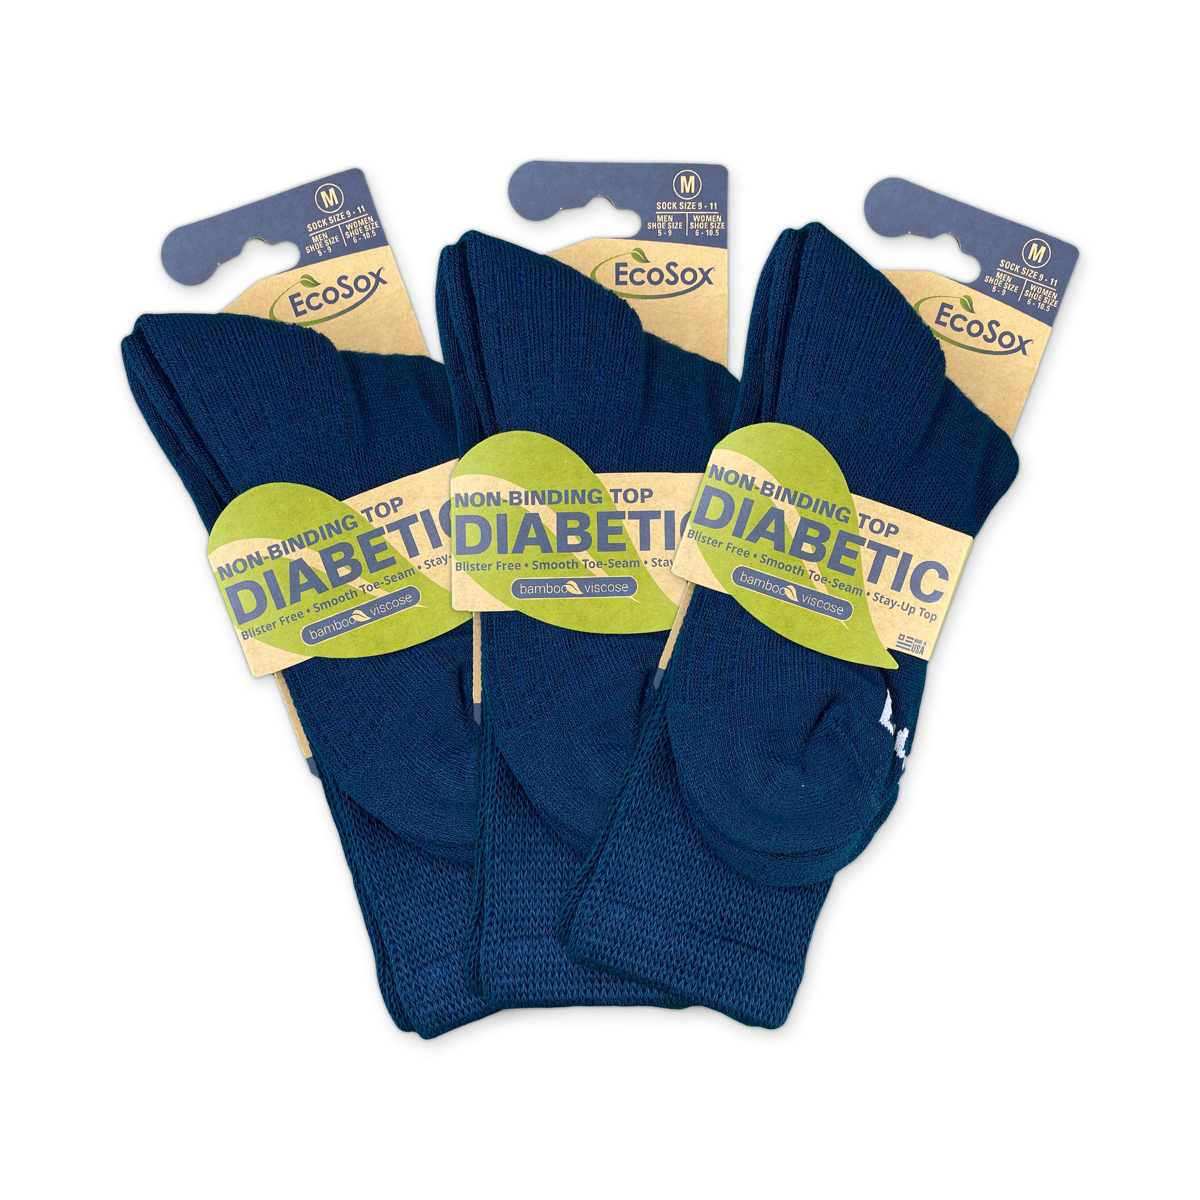 The Benefits of Diabetic Socks from EcoSox